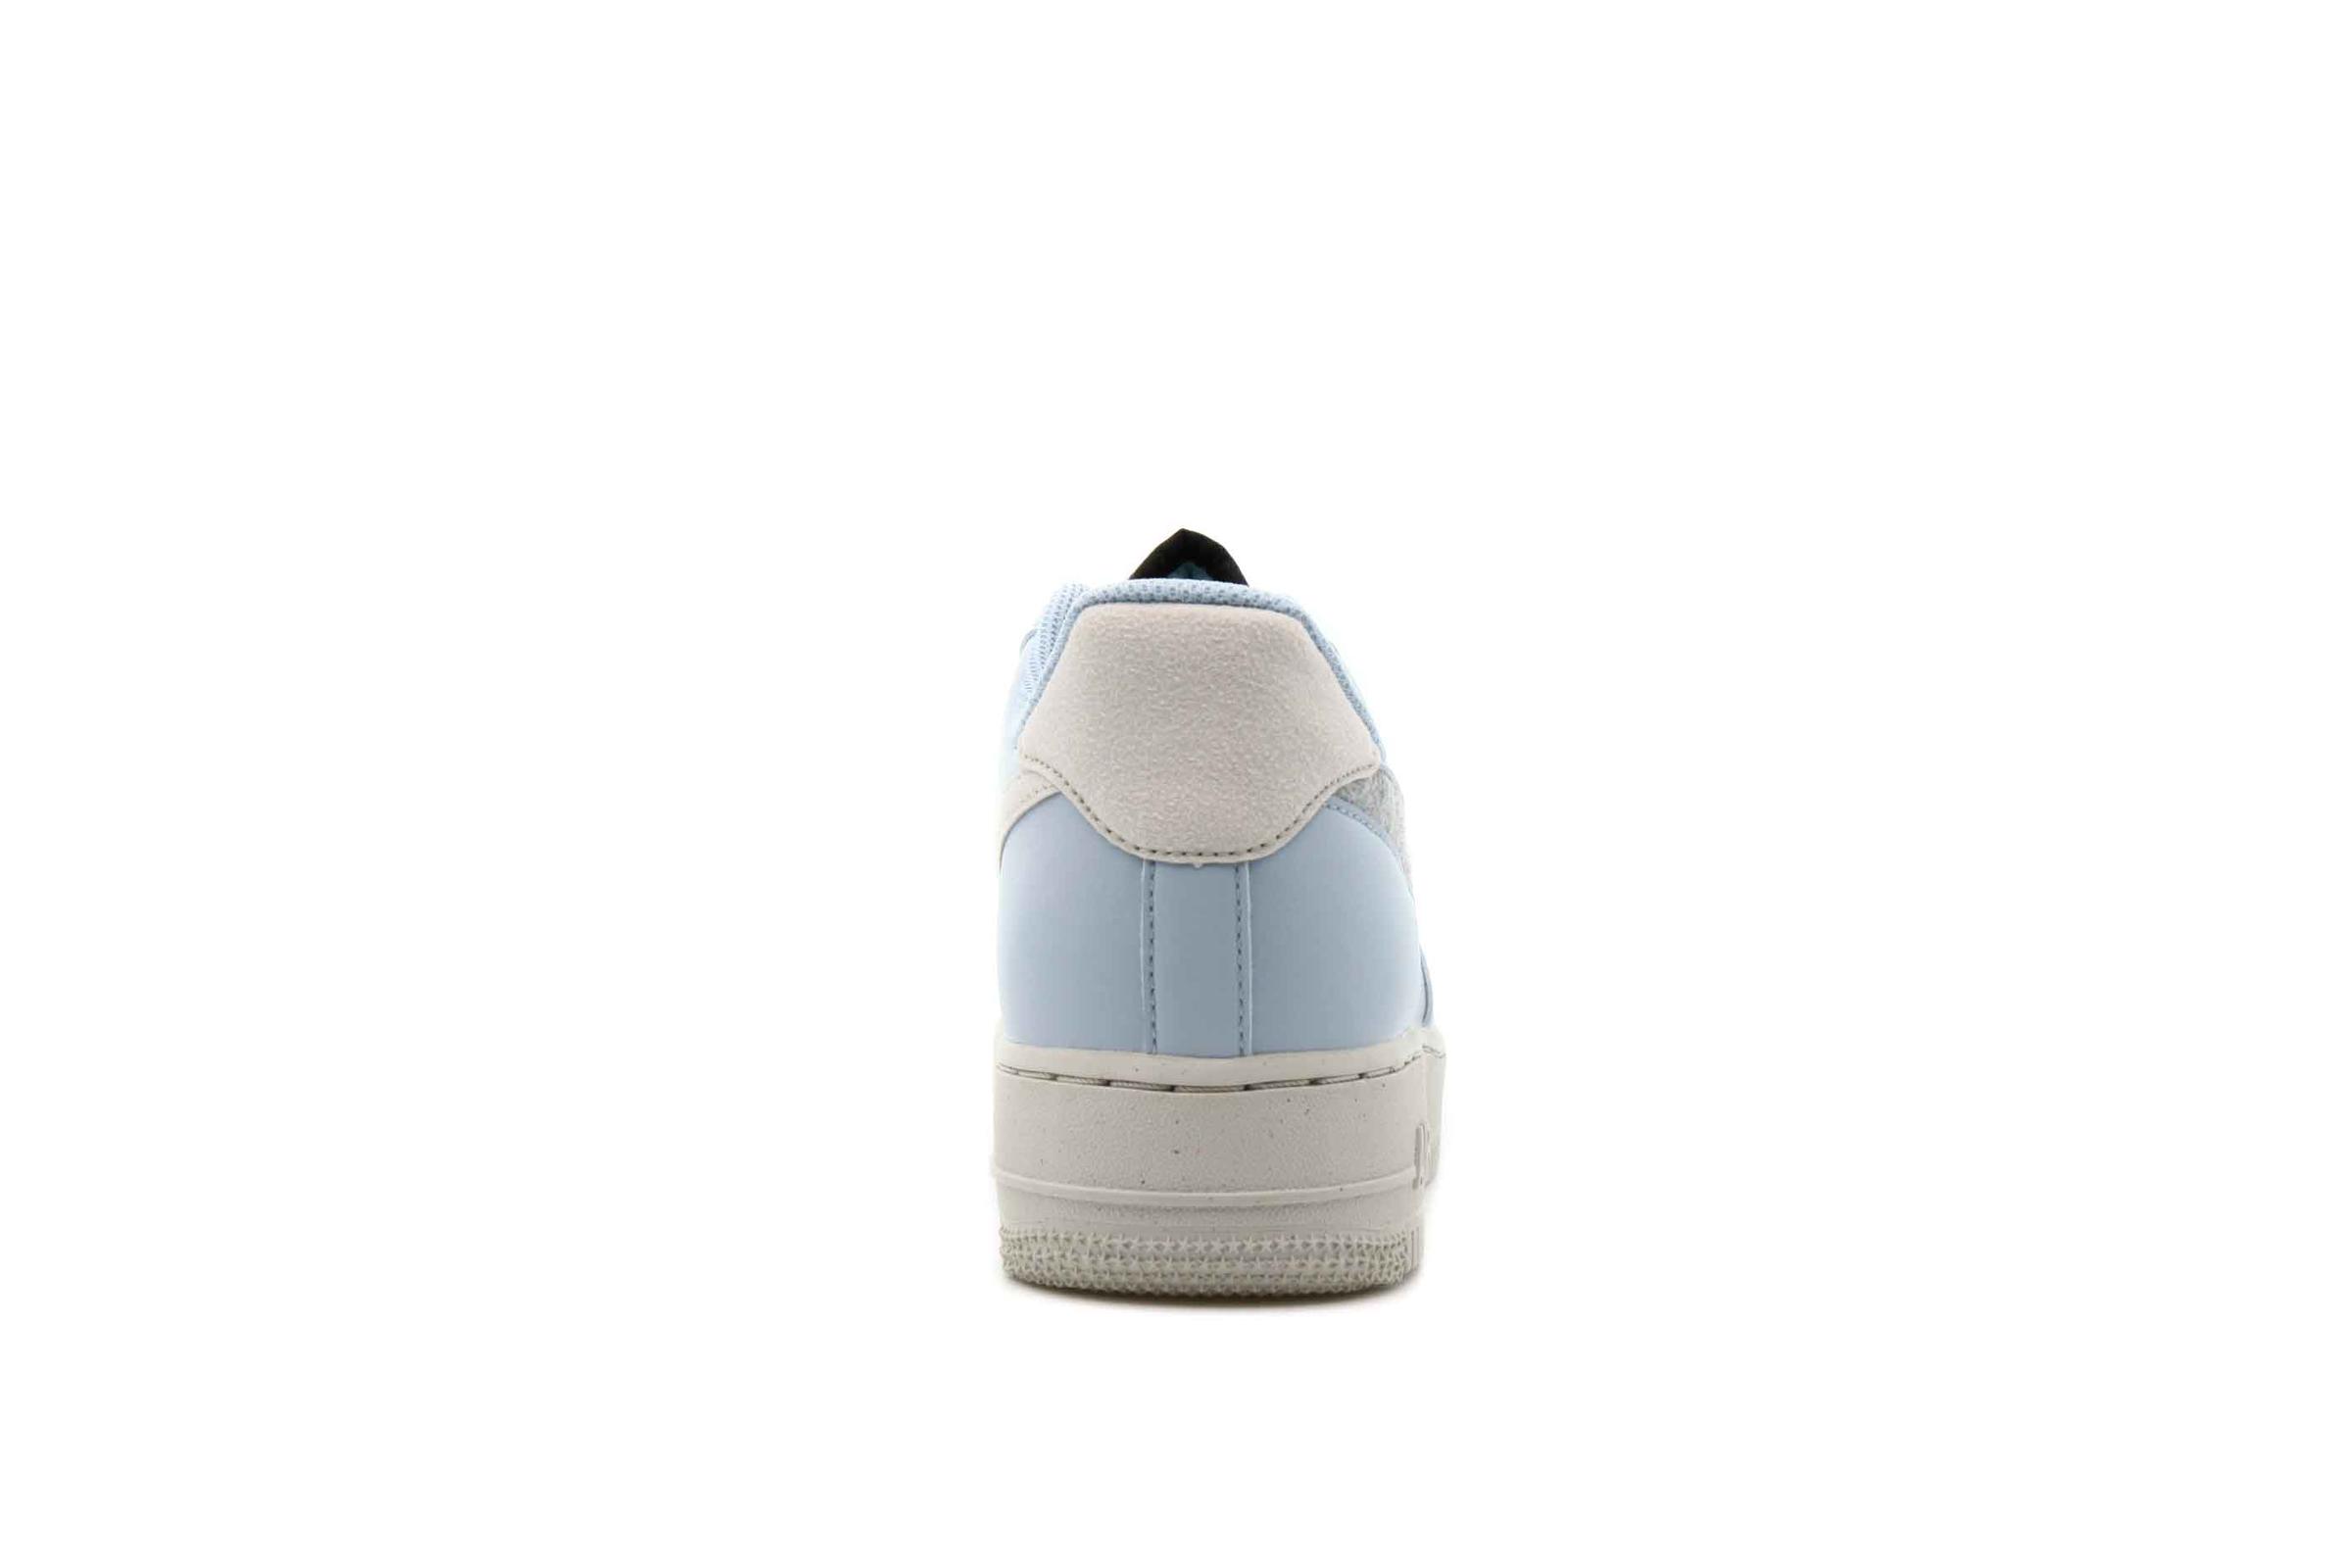 Nike WMNS AIR FORCE 1 '07 SE "ARMORY BLUE"